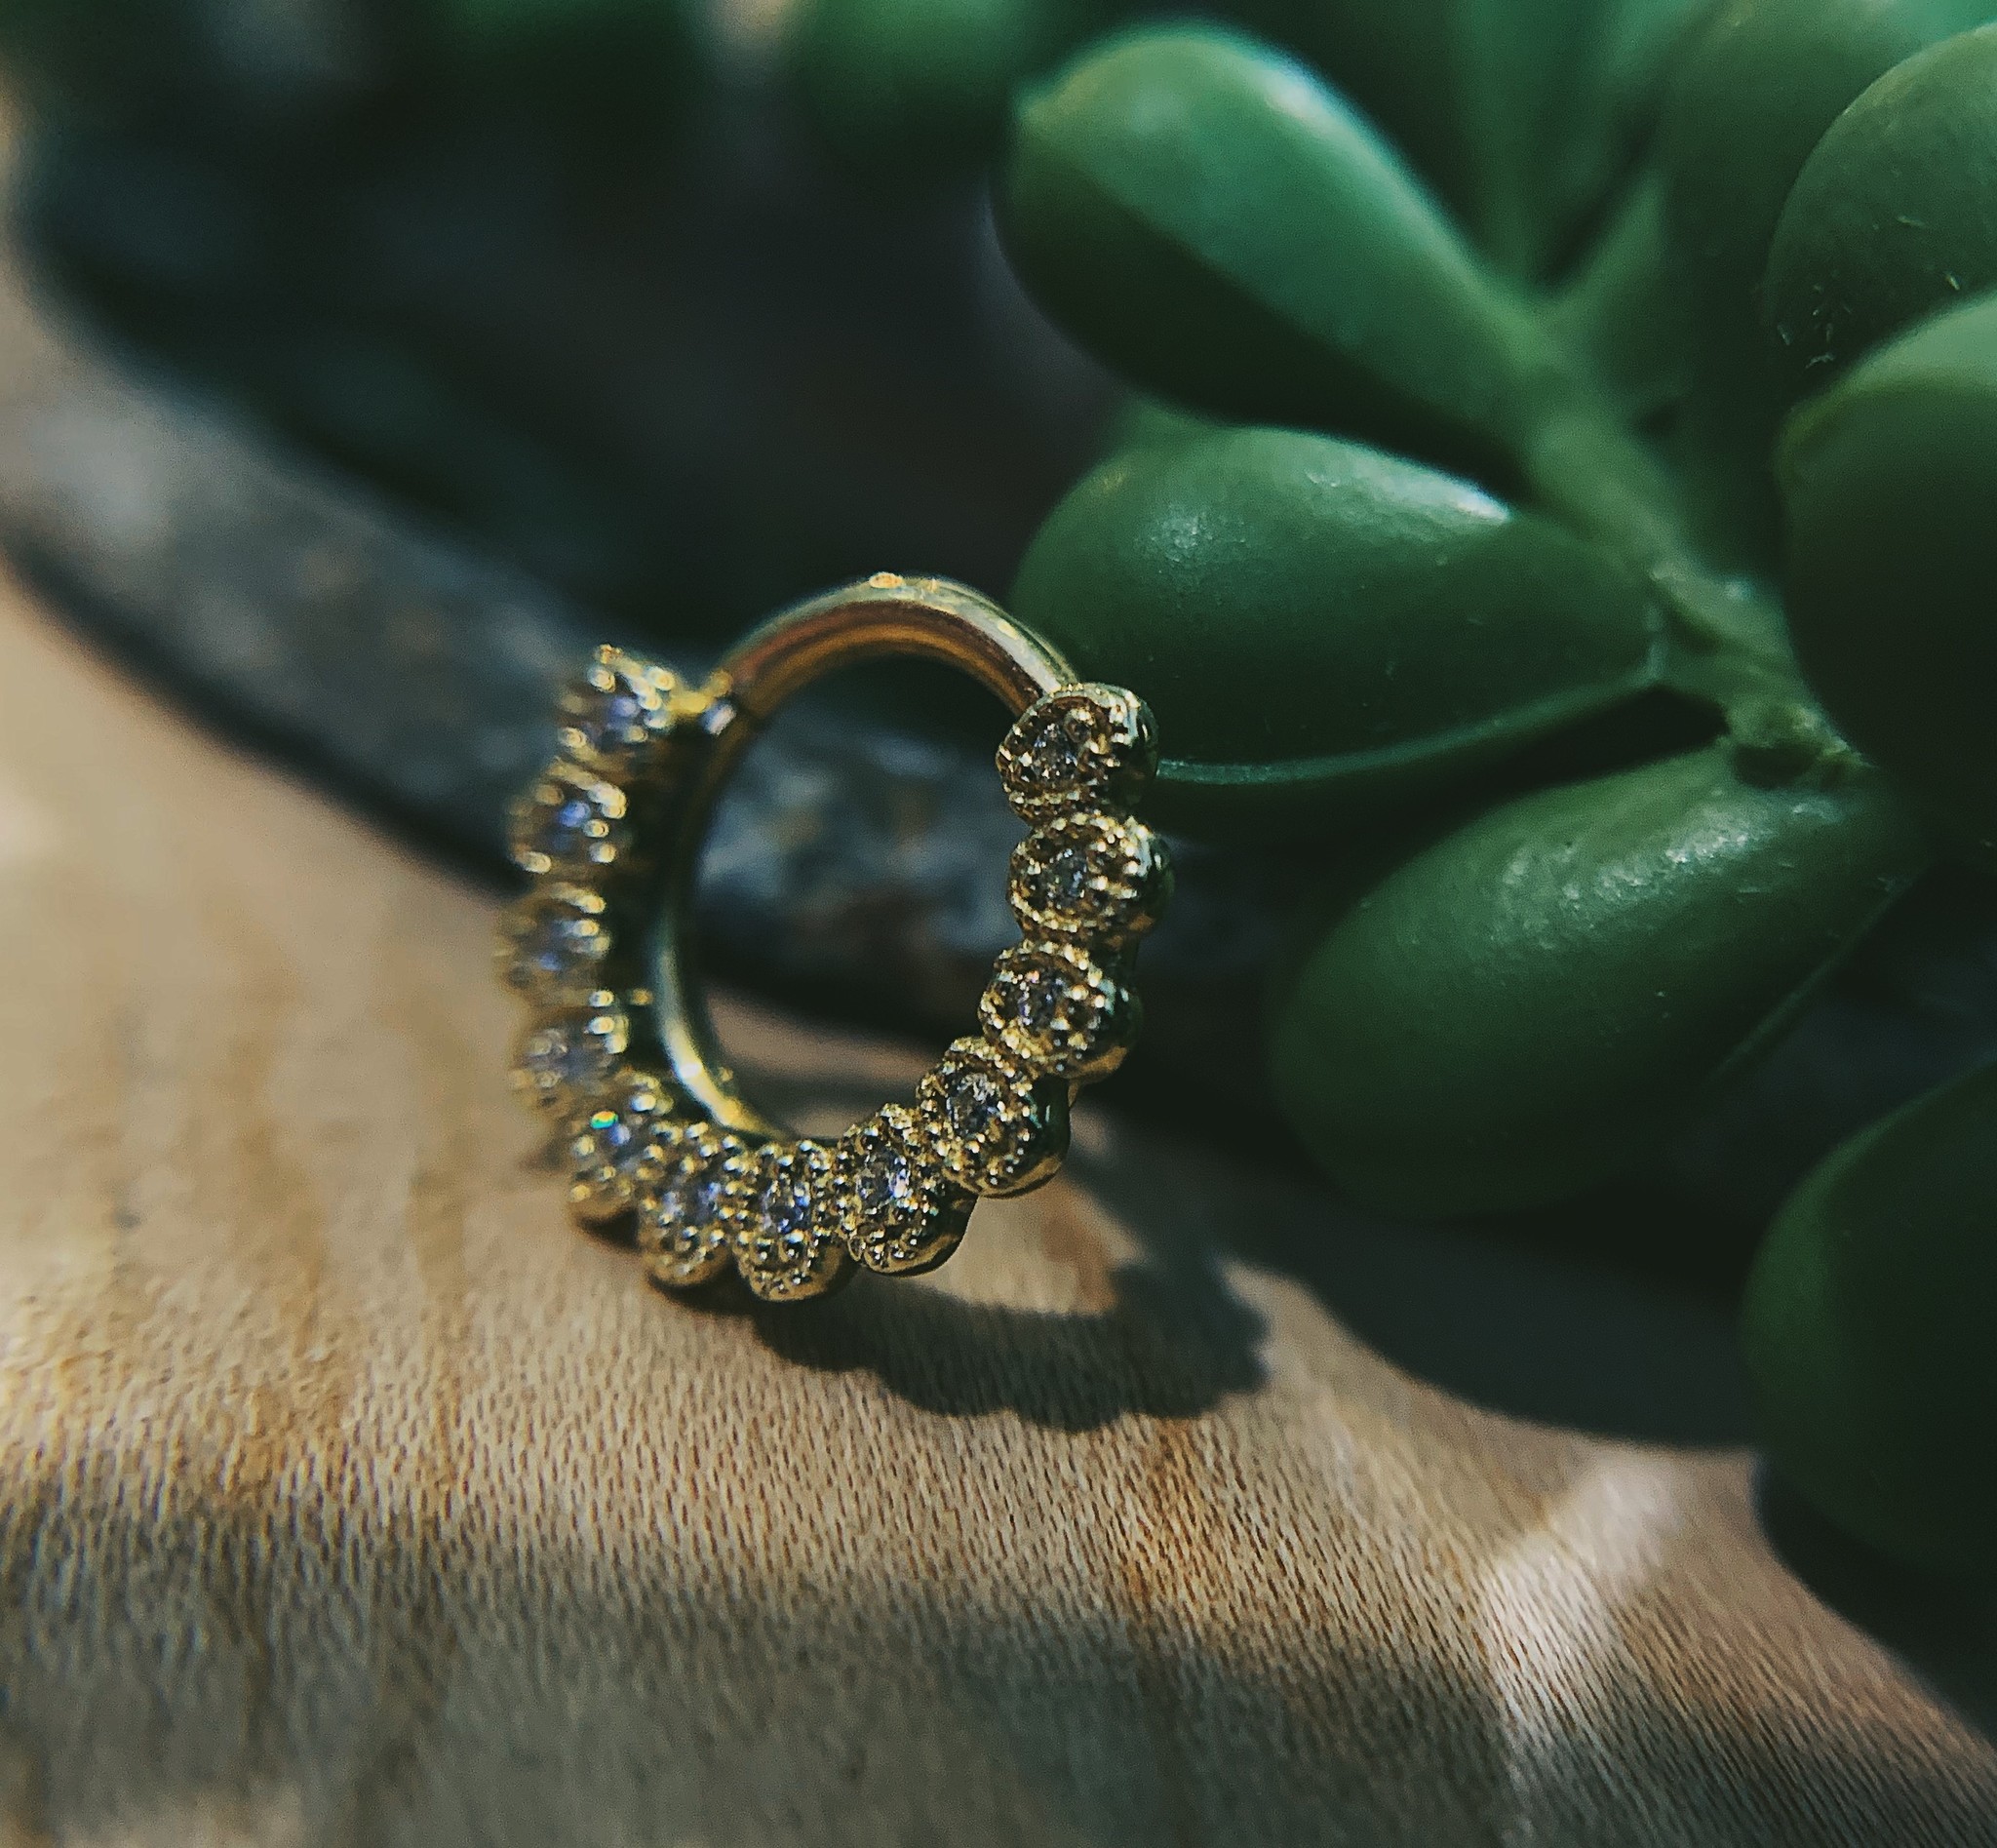 16g 5/16 "Santa Rosa" Seam Ring with CZ by BVLA